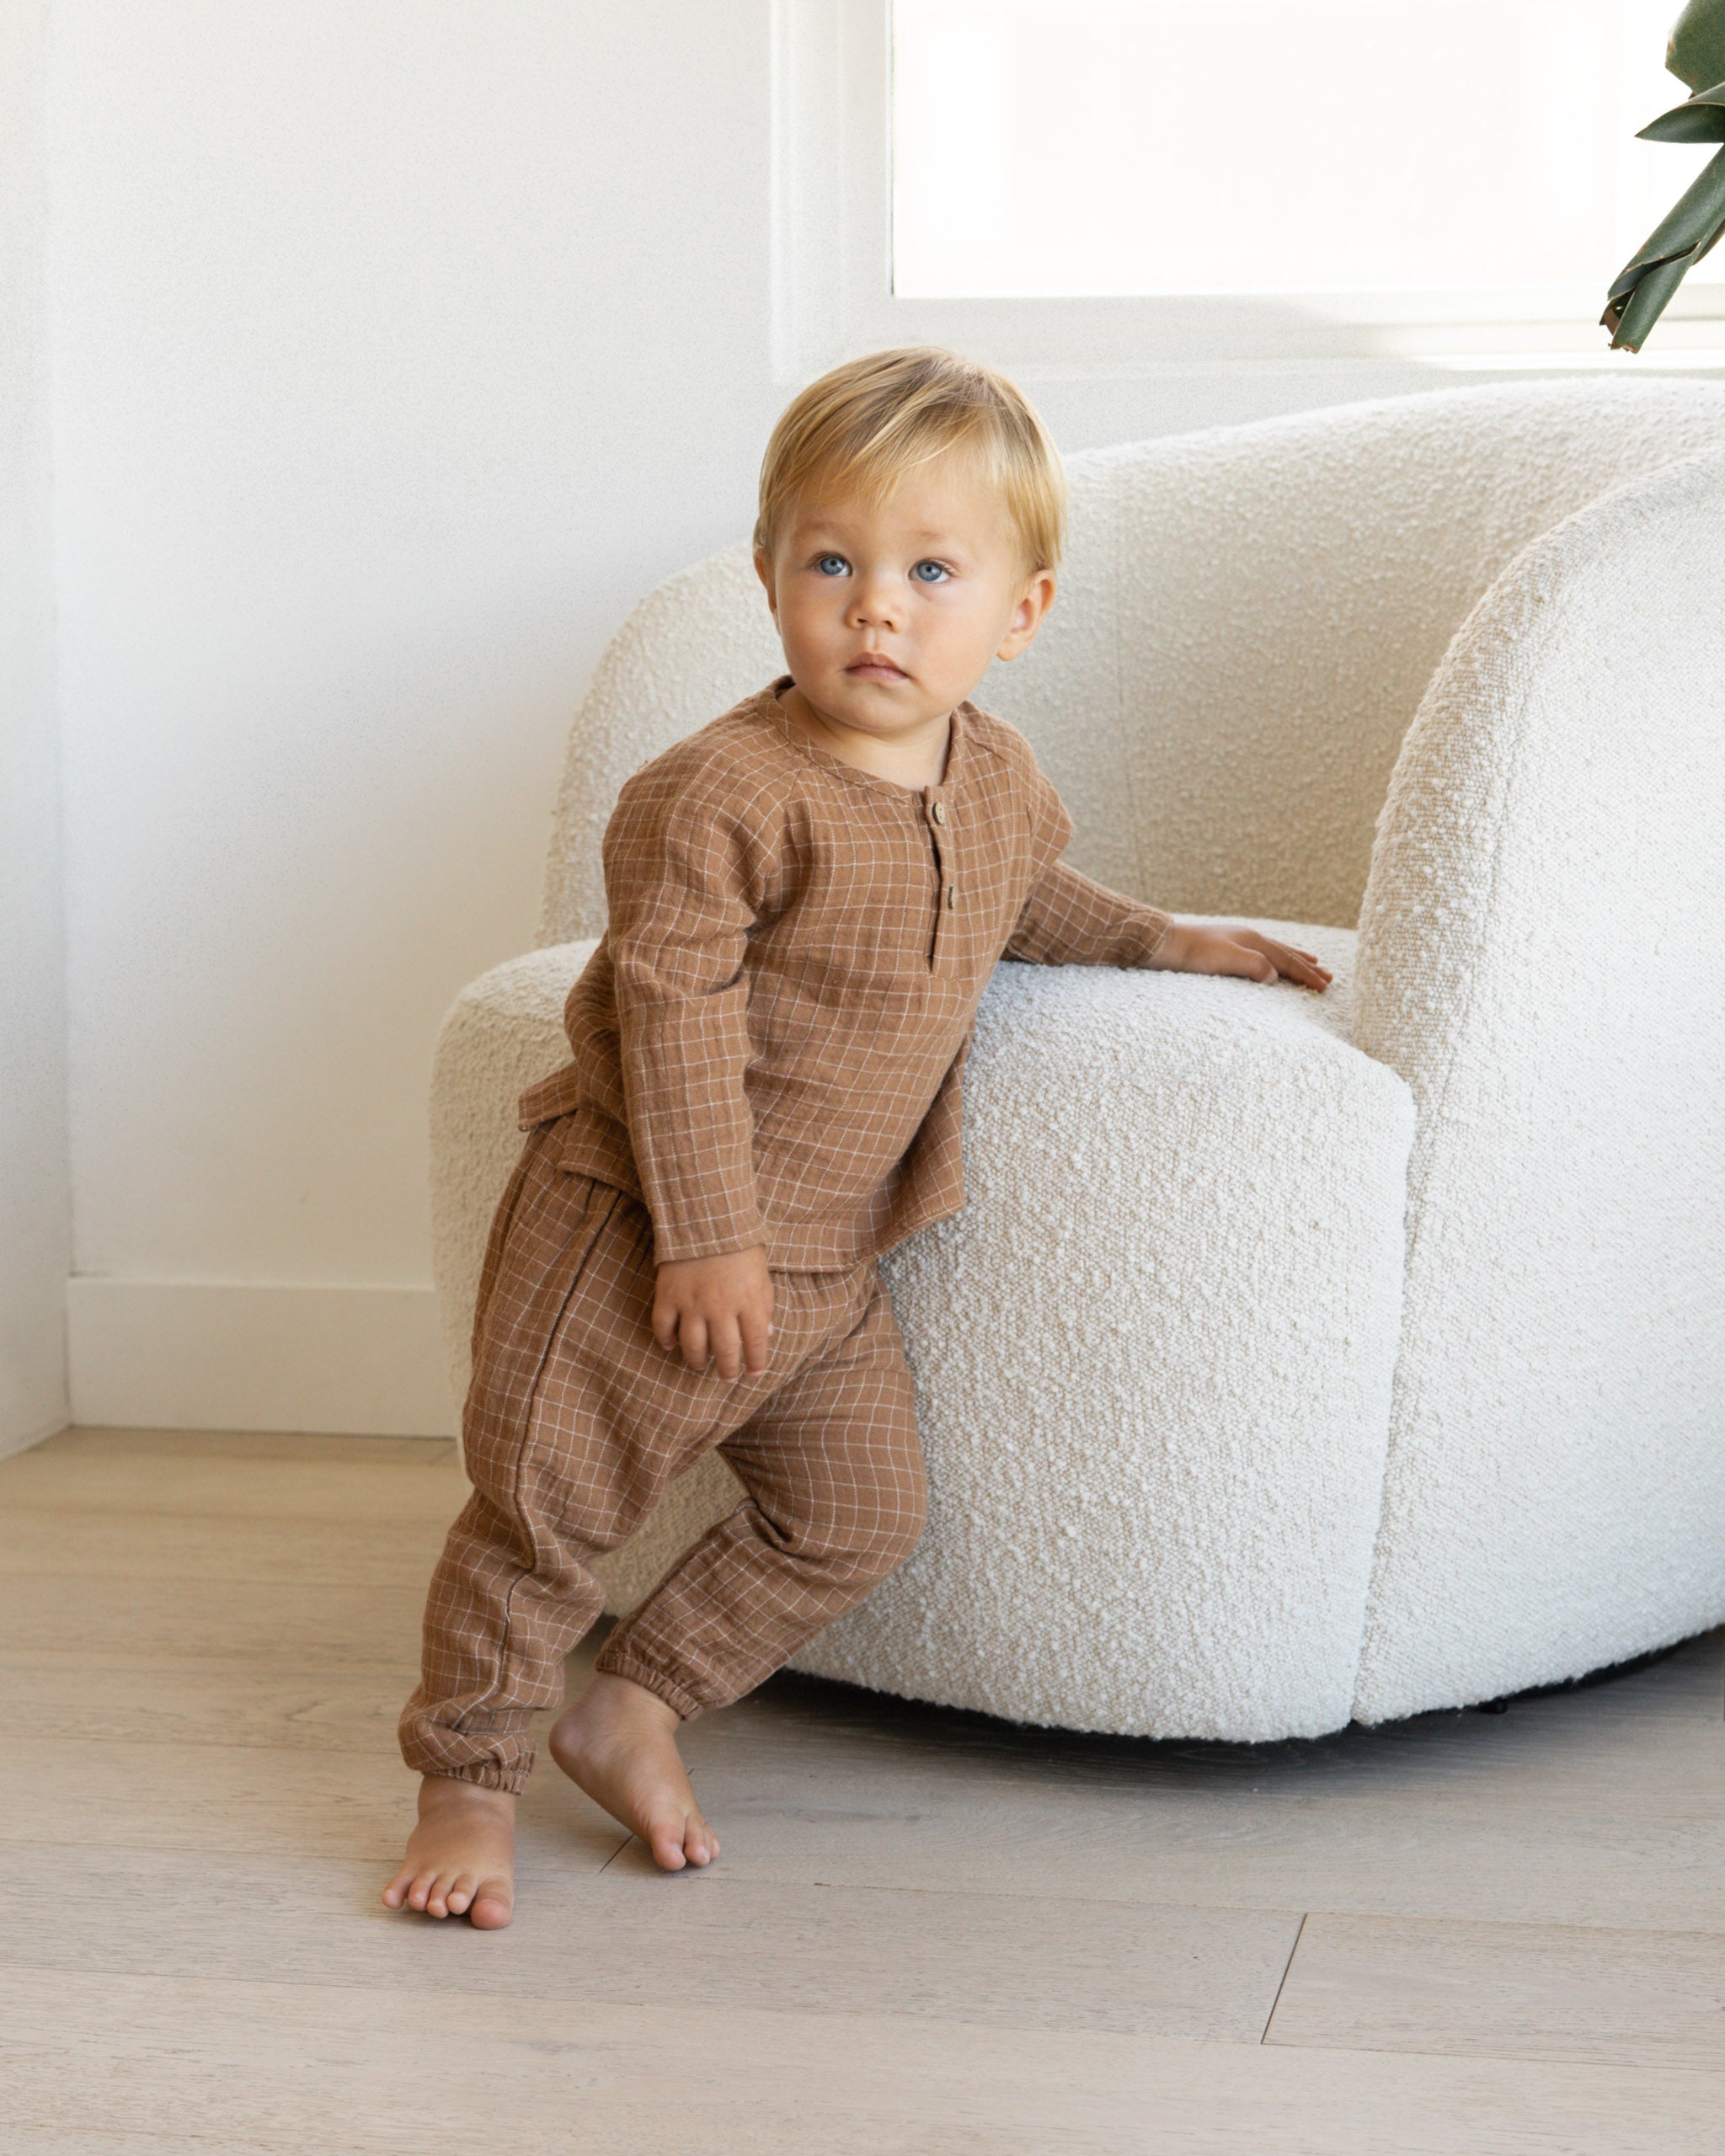 Woven Pant || Cinnamon Grid - Rylee + Cru | Kids Clothes | Trendy Baby Clothes | Modern Infant Outfits |